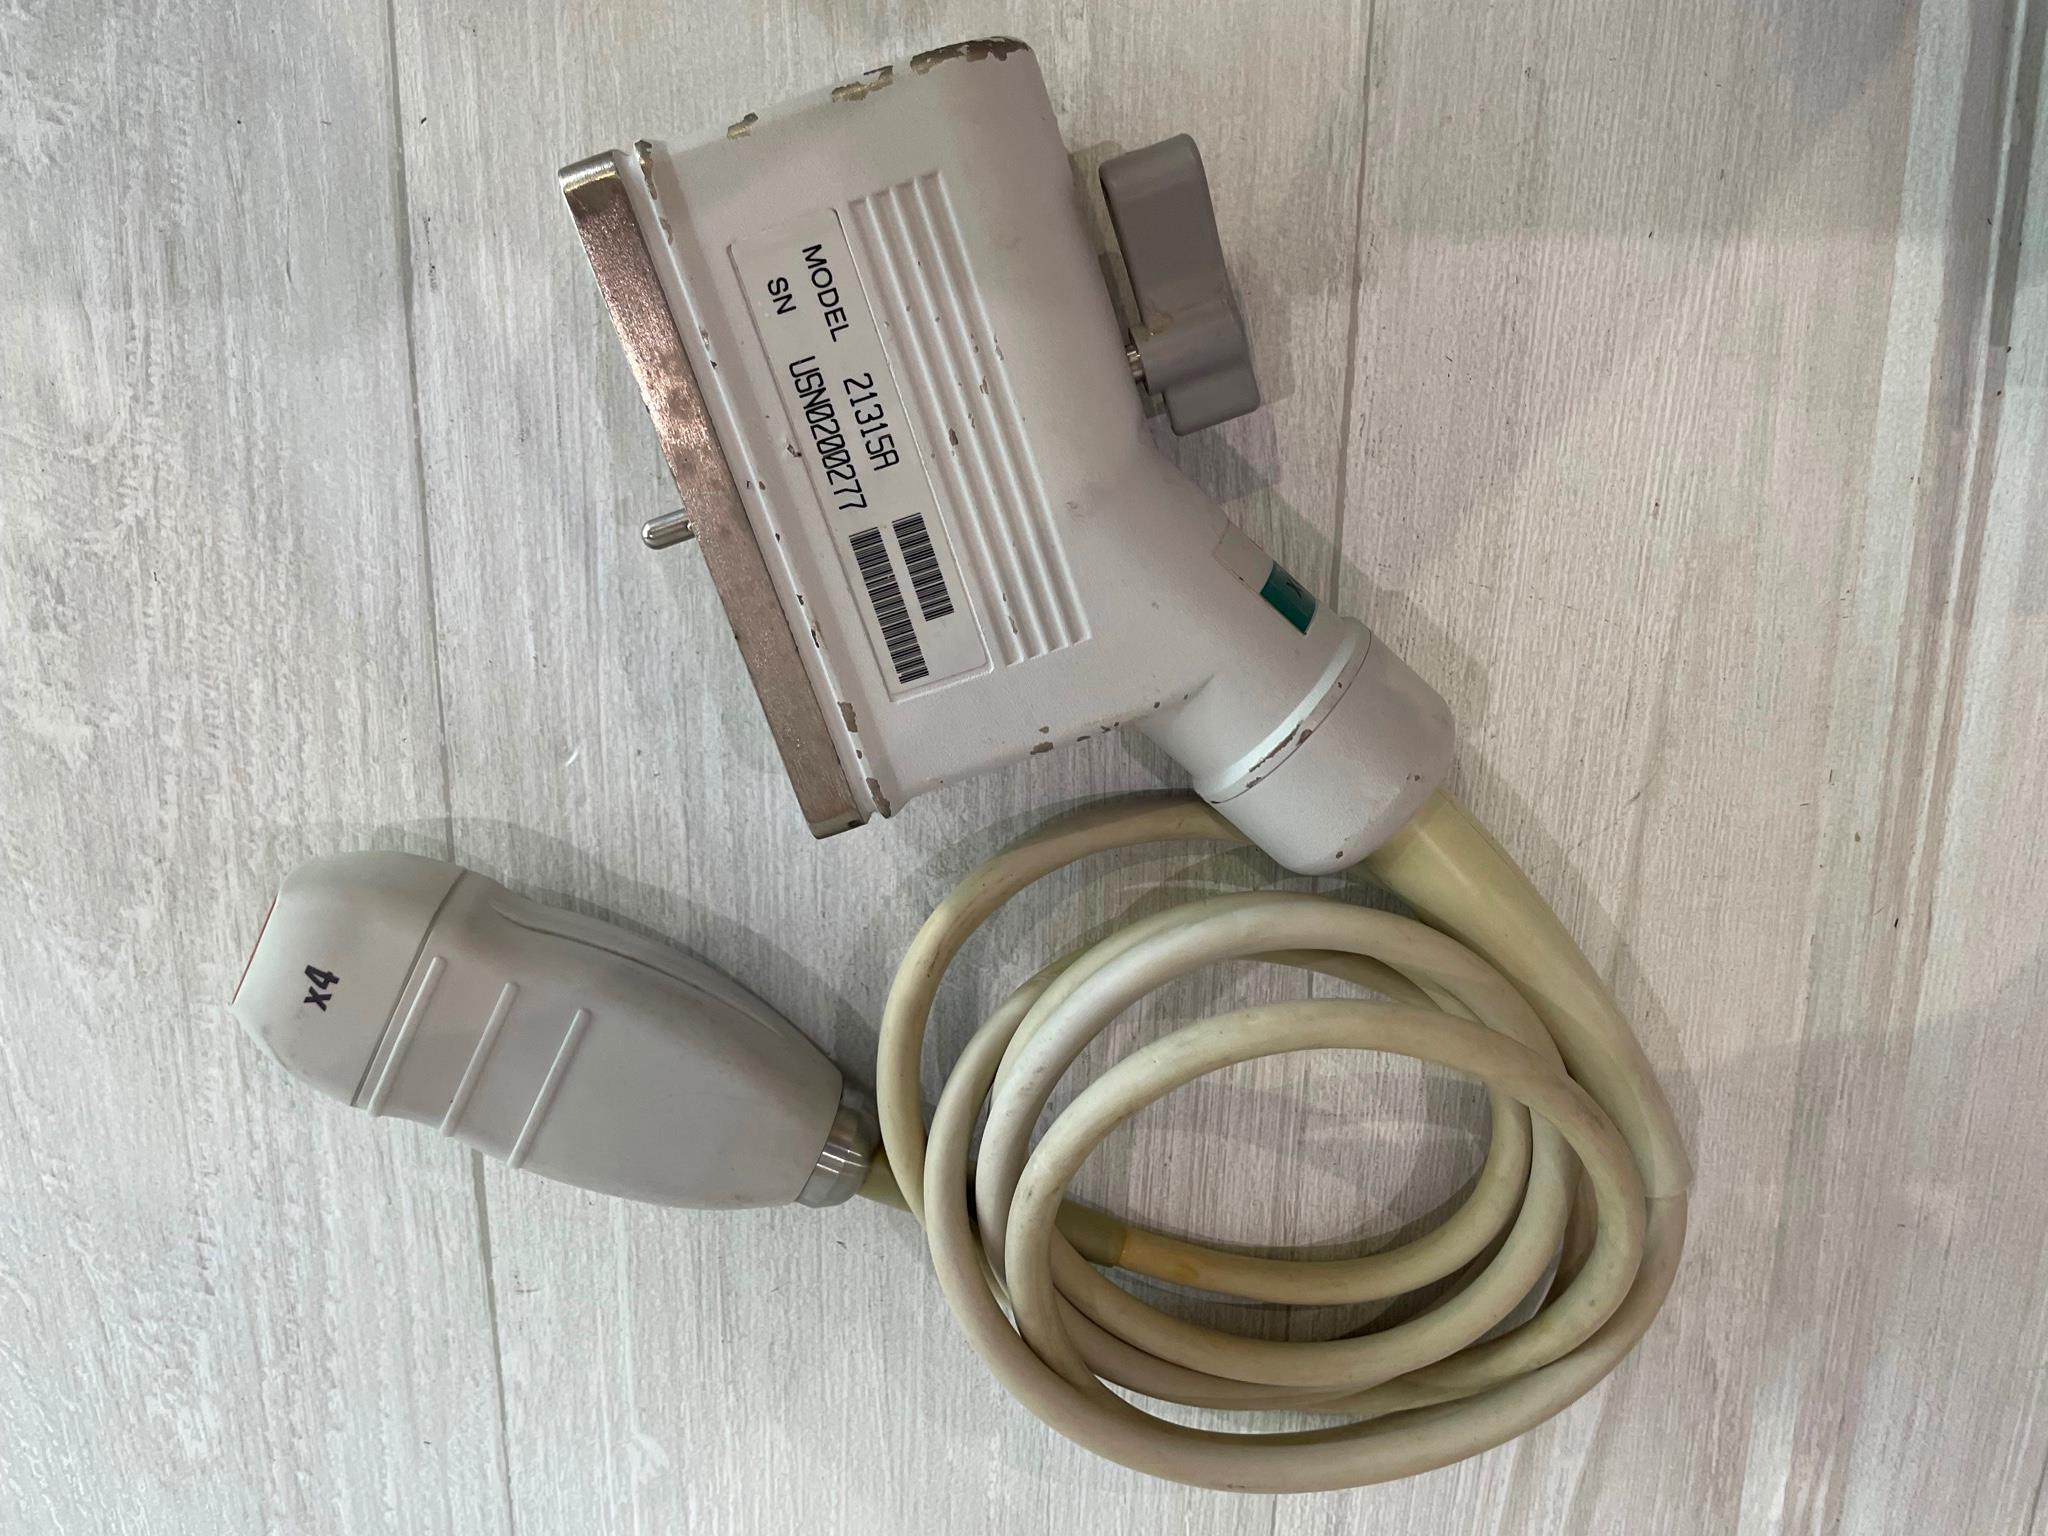 Philips x4 Ultrasound Probe Transducer 2003 DIAGNOSTIC ULTRASOUND MACHINES FOR SALE